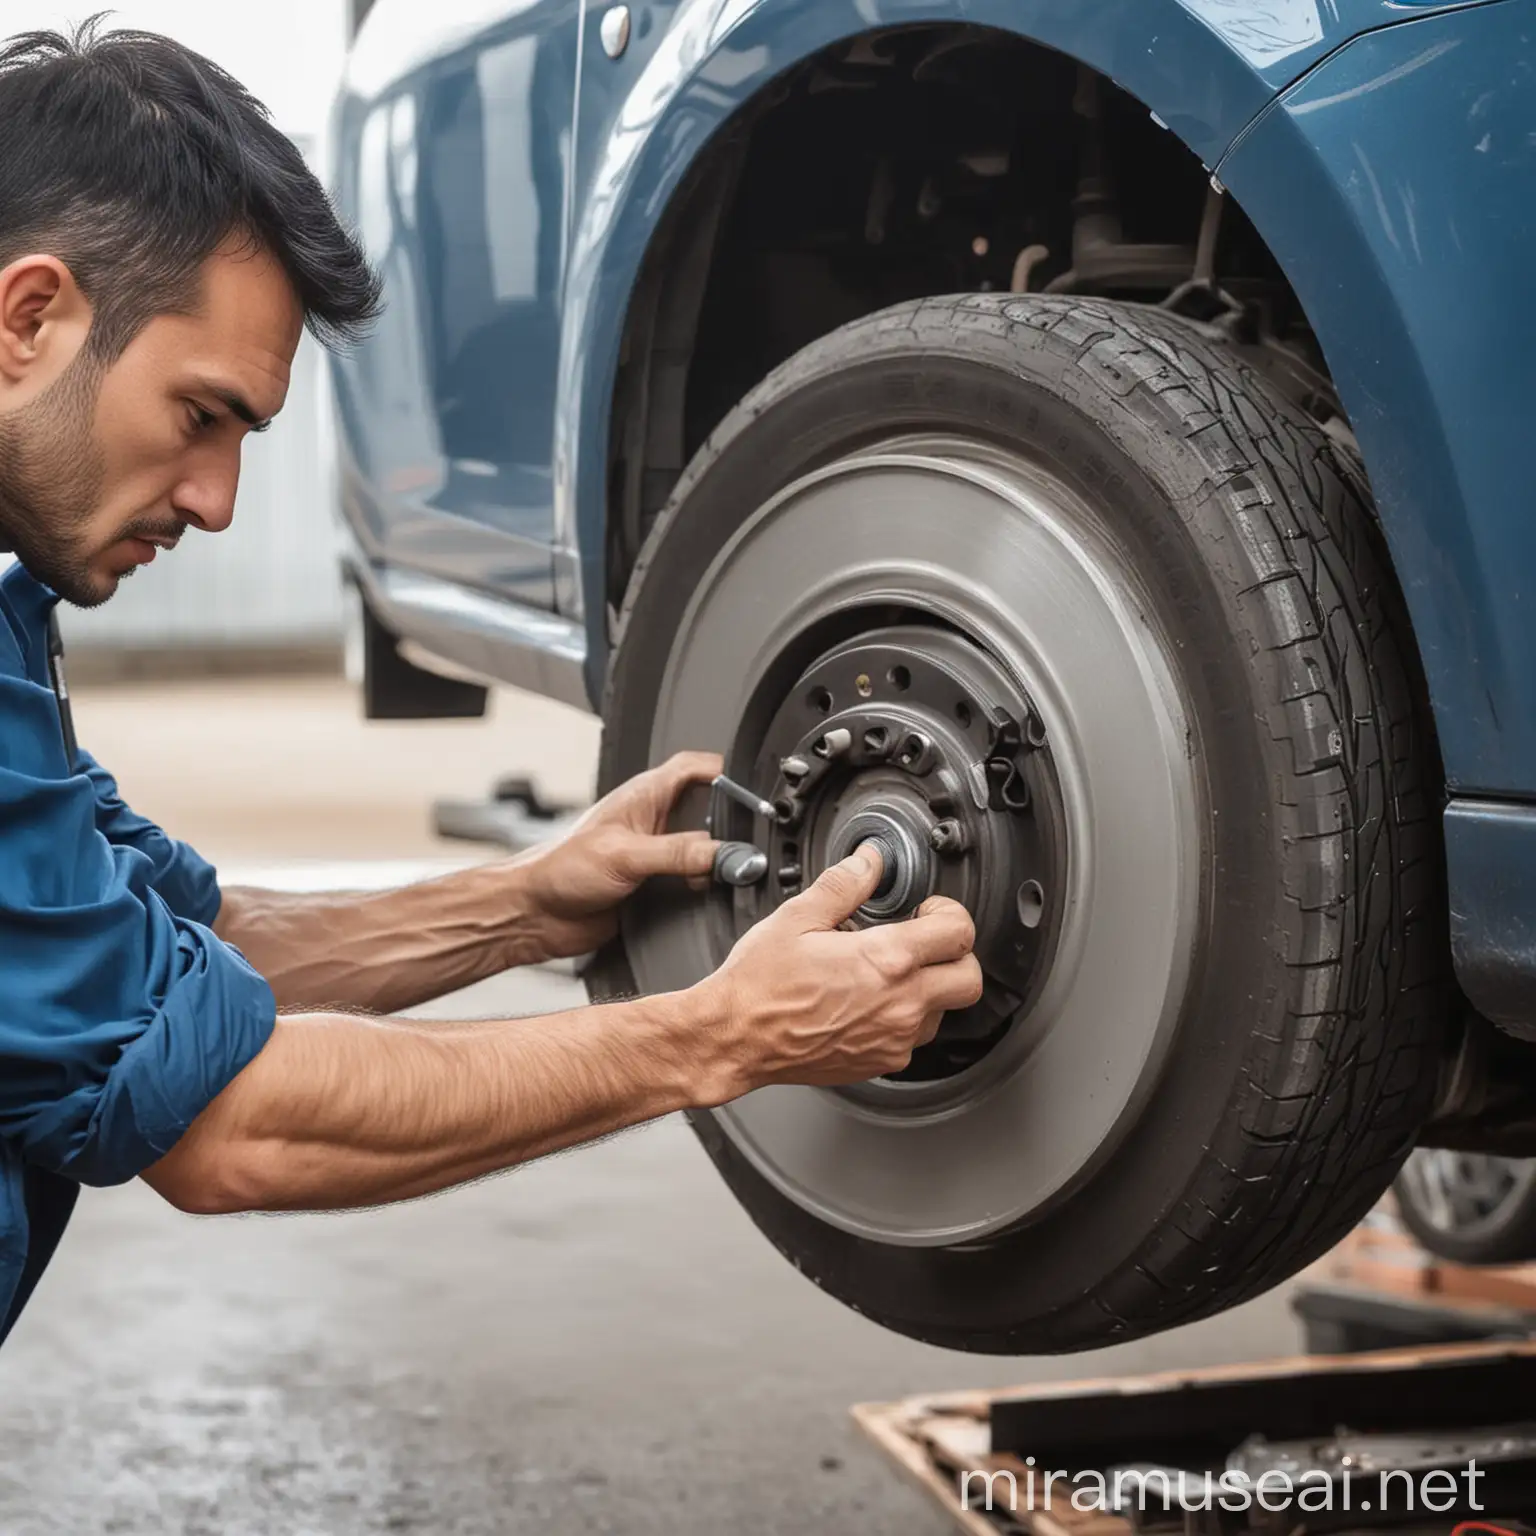 Thinking that the car repairman is holding tools to repair the car's brake disc